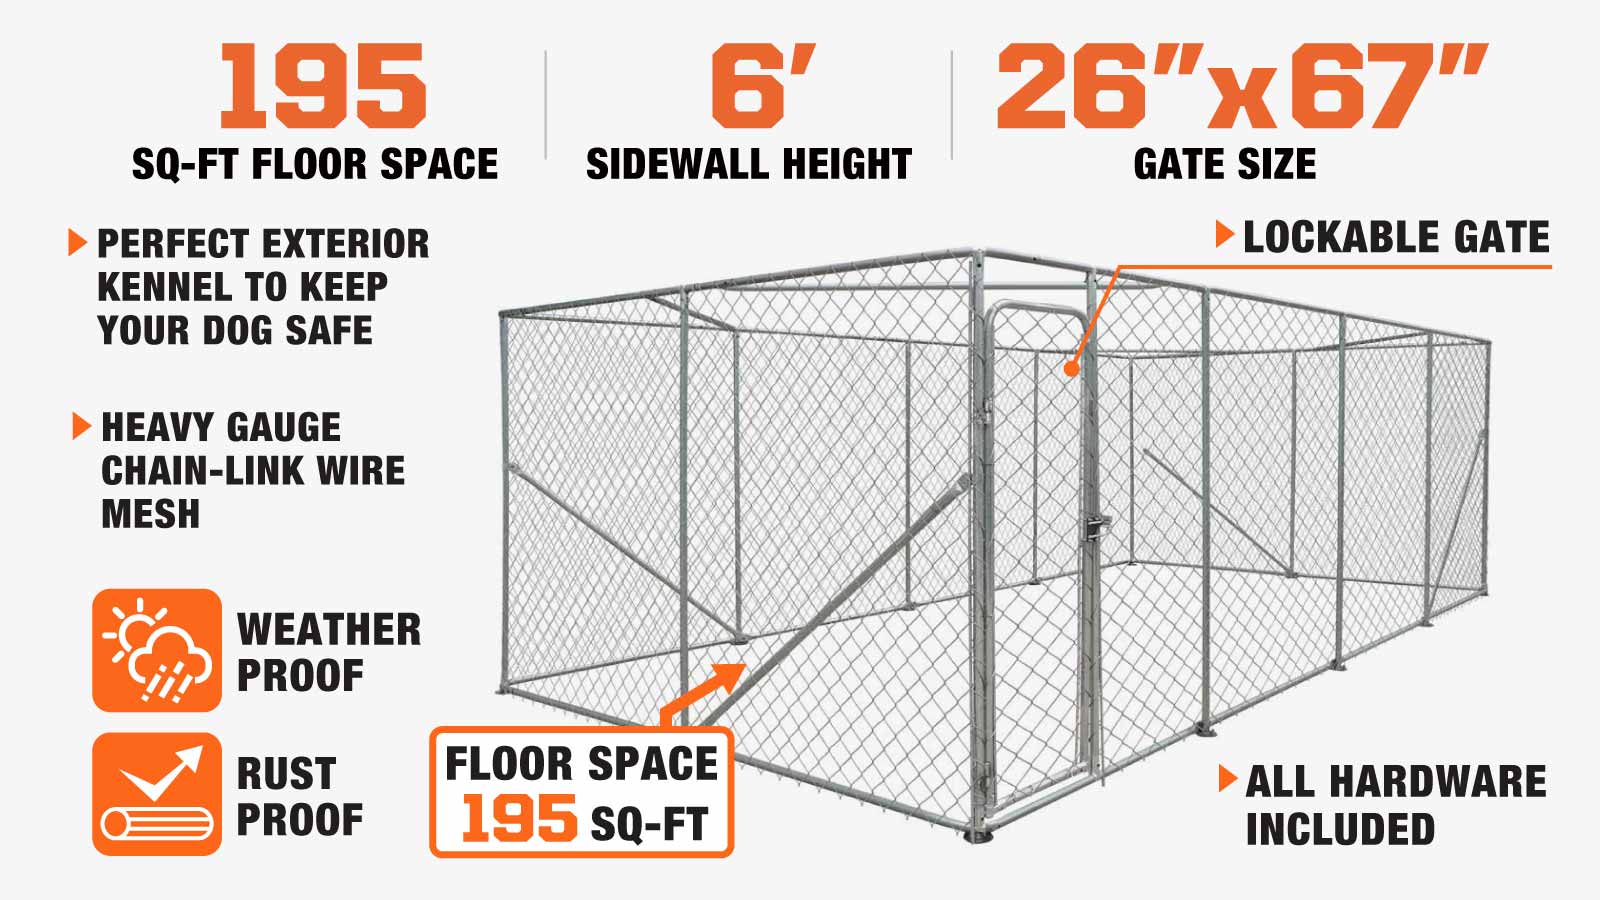 TMG Industrial 10’ x 20’ Outdoor Dog Kennel Playpen, Outdoor Dog Runner, Pet Exercise House, Lockable Gate, 6’ Chain-Link Fence, TMG-DCP1020-description-image